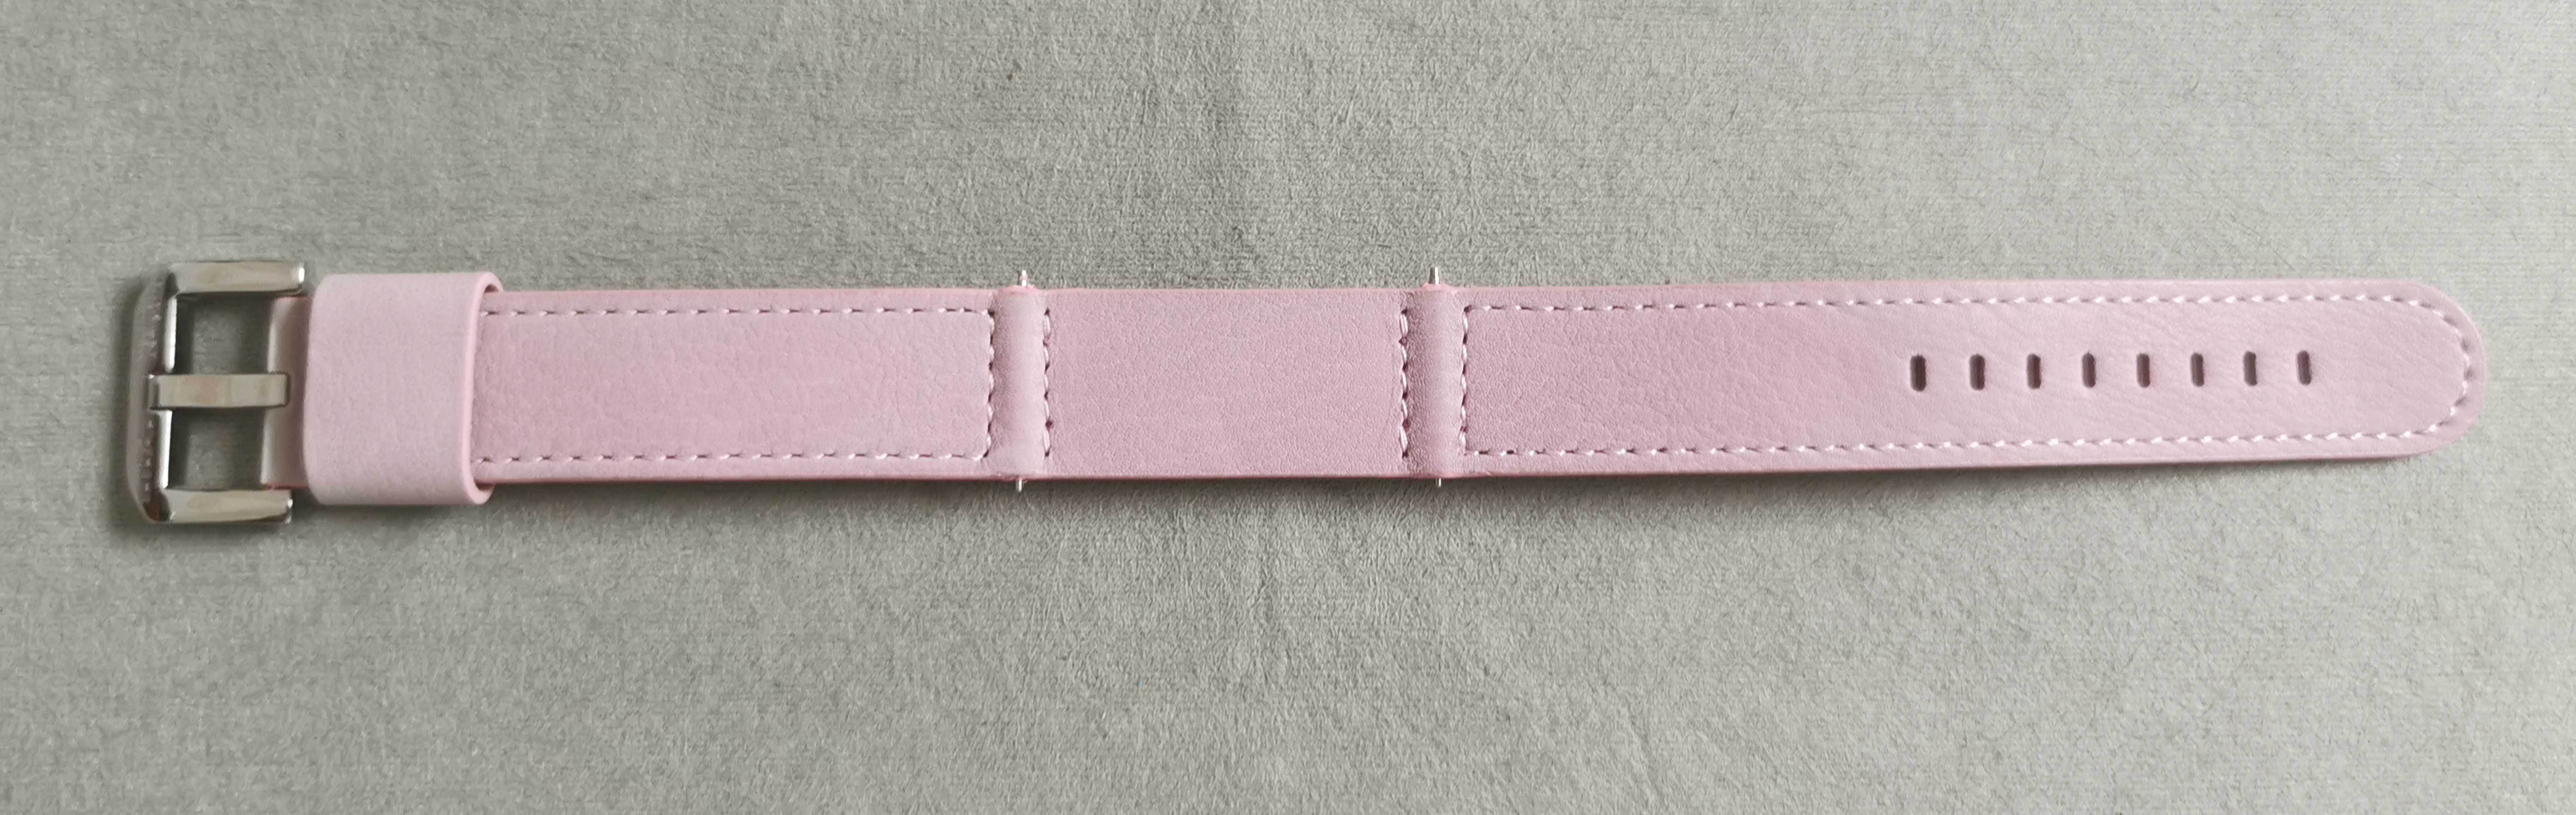 Anonimo I.T.A. Pink leather strap mm 18/18 with steel buckle mm 18 Total length cm 22 new condition | San Giorgio a Cremano